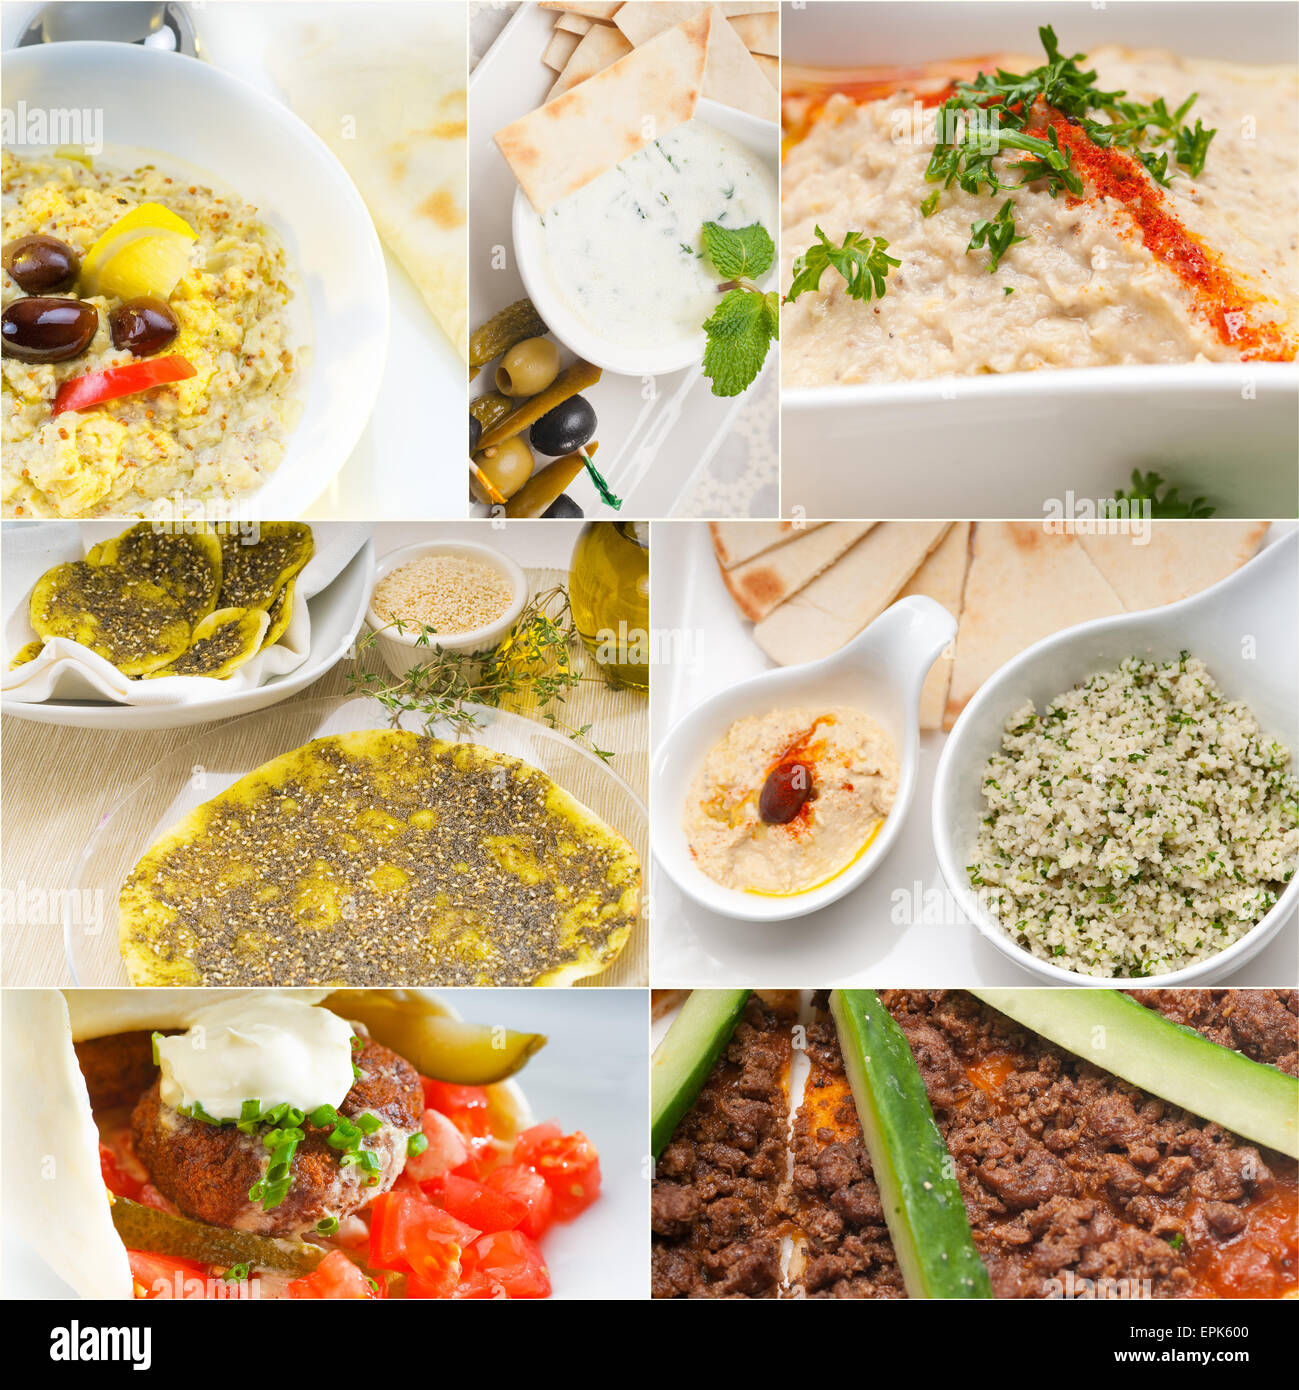 Arab middle eastern food collage Stock Photo